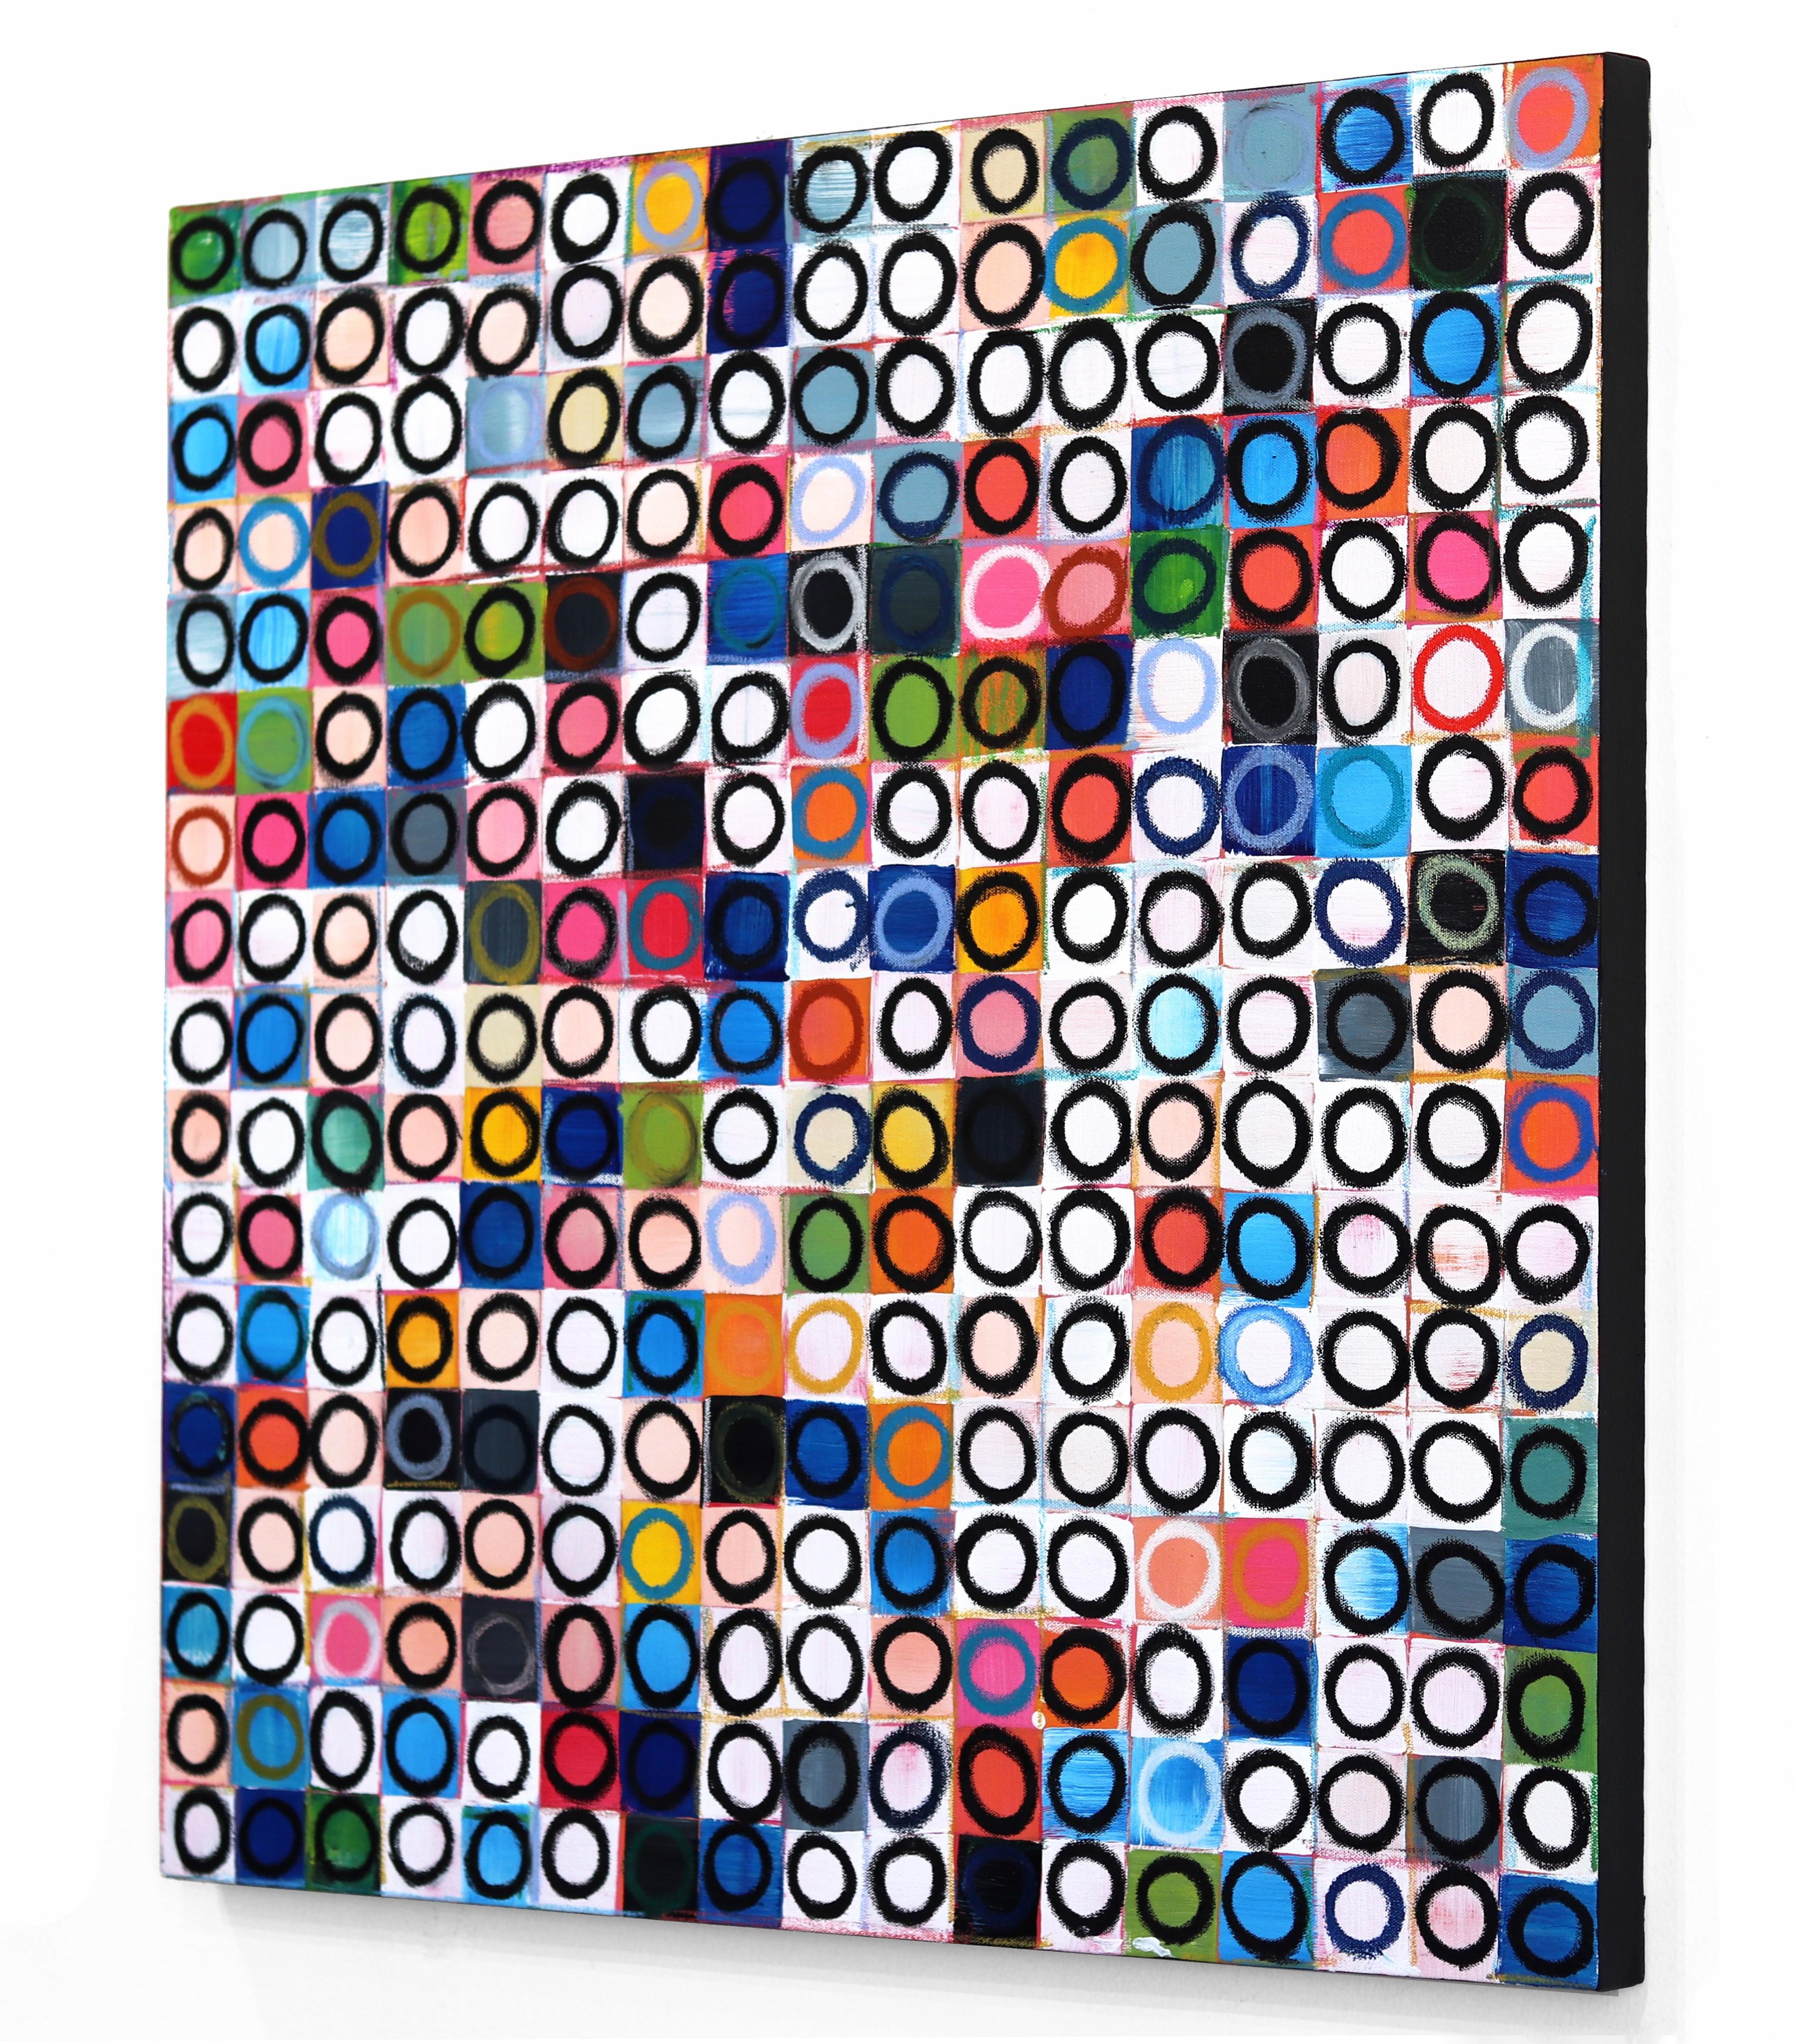 289 Circles - Colorful Abstract Geometric Original Painting on Canvas For Sale 1